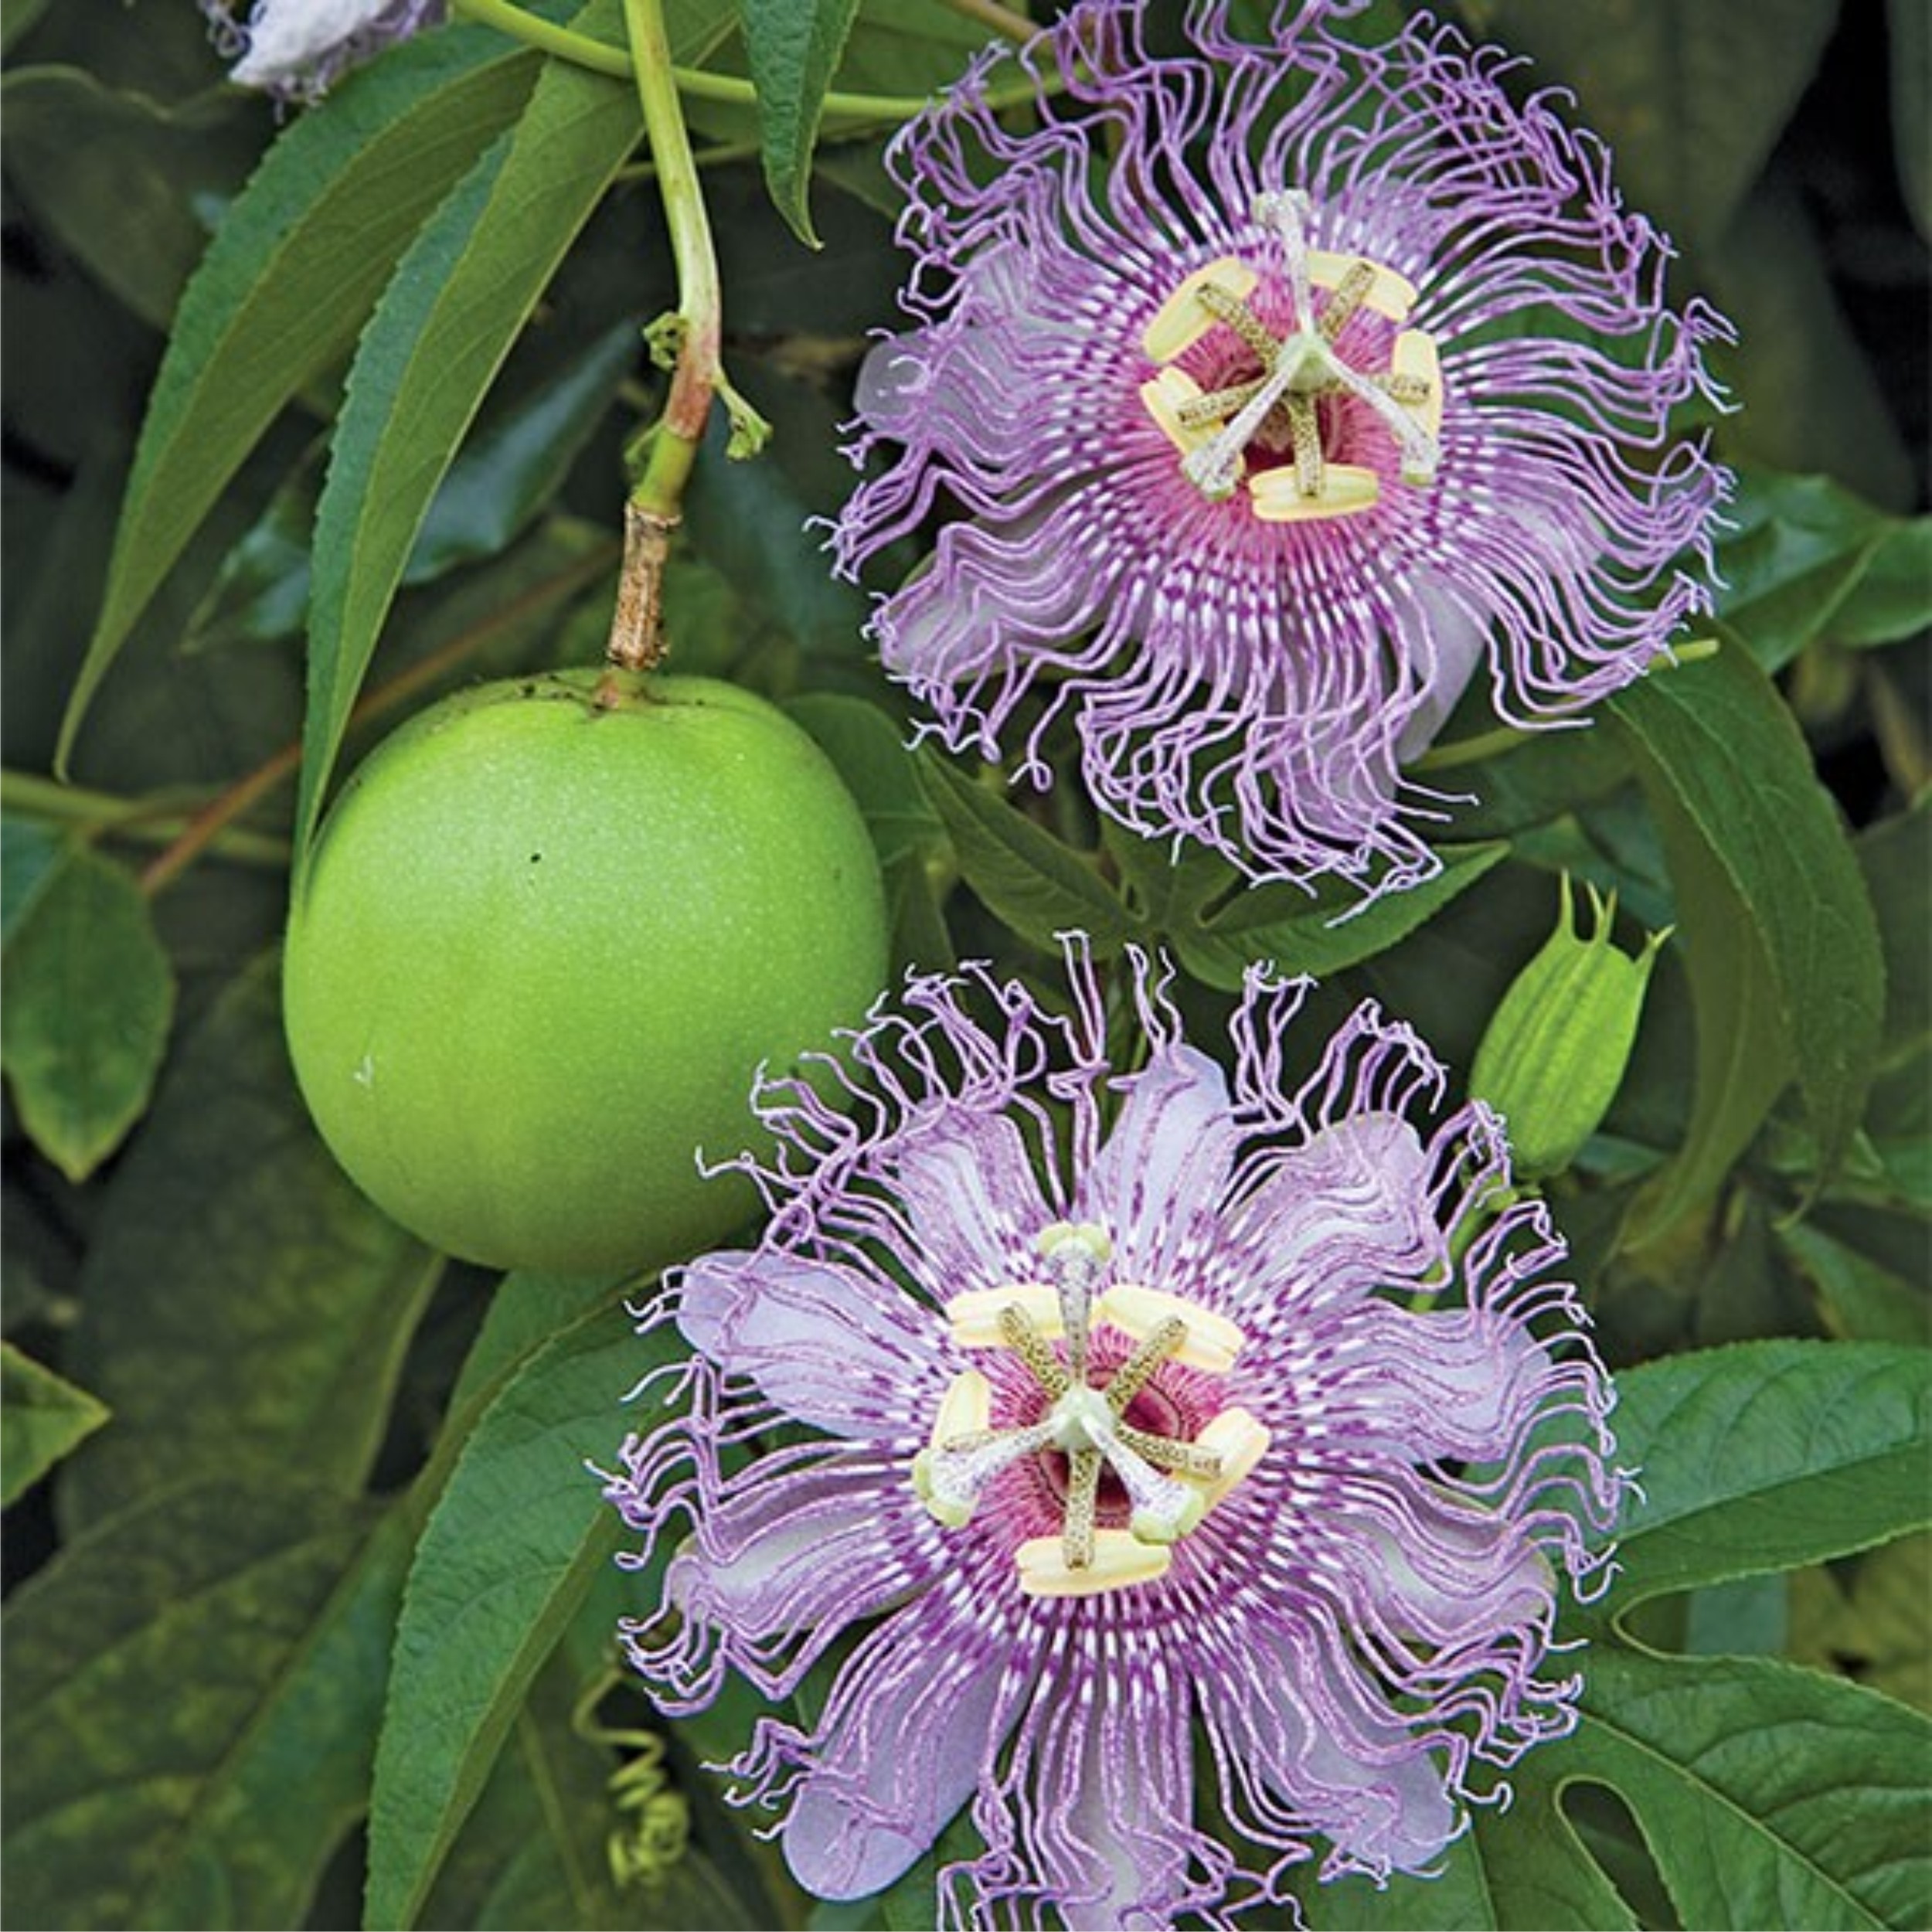 One plant that I have often admired since childhood is the passion vine, which produces an intricate flower called a maypop. This native vine produces the only leaf that the Gulf fritillary caterpillar will eat.
